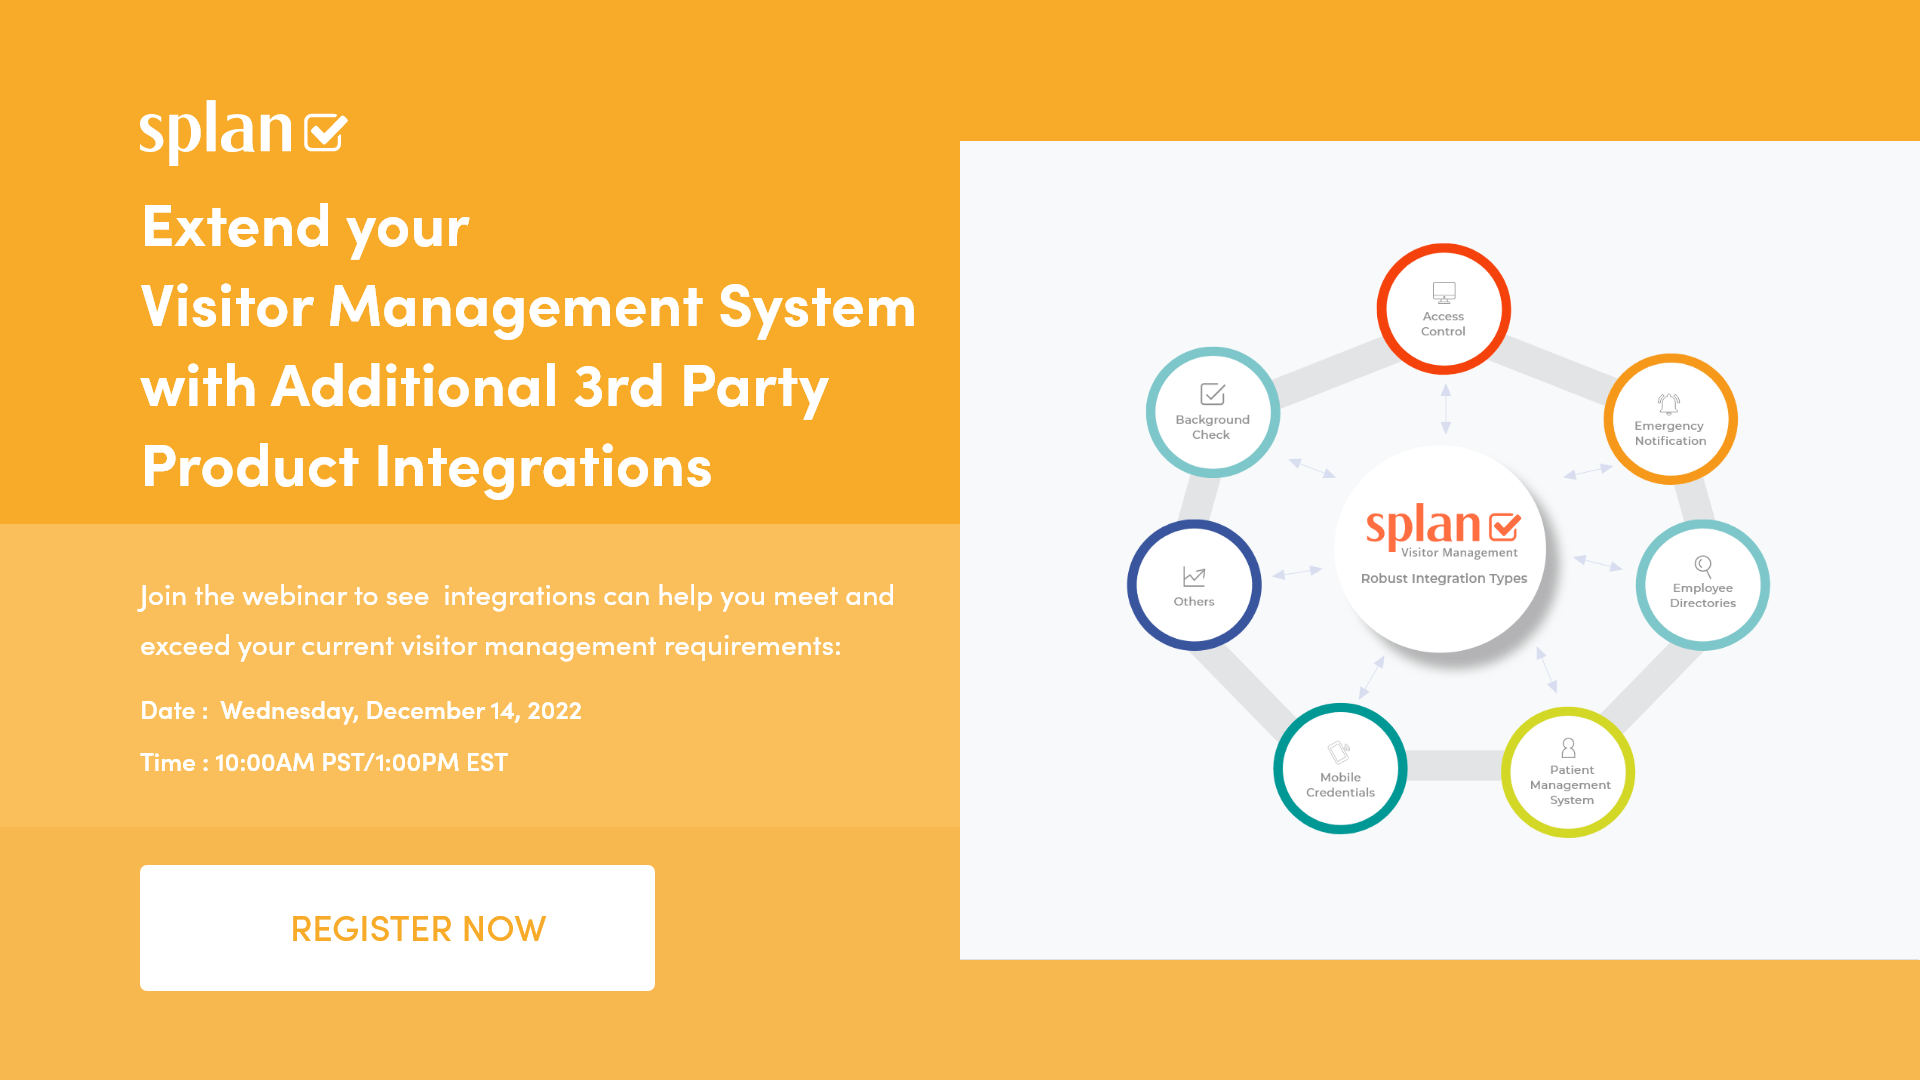 Extend your Visitor Management System with Additional 3rd Party Product Integrations